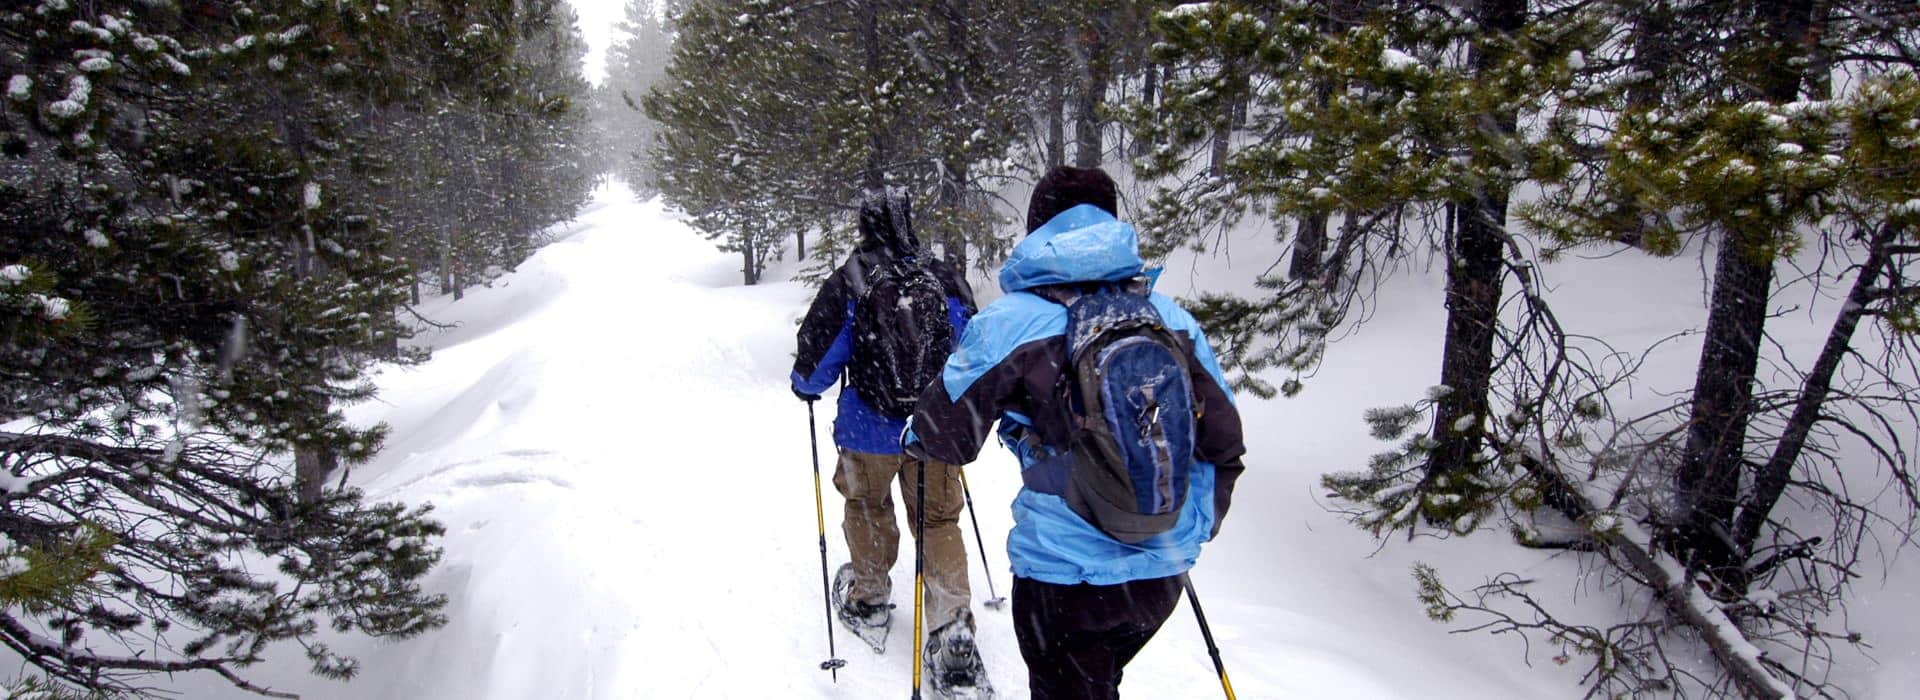 Two people snowshoeing on a path through tall evergreen trees in the snow